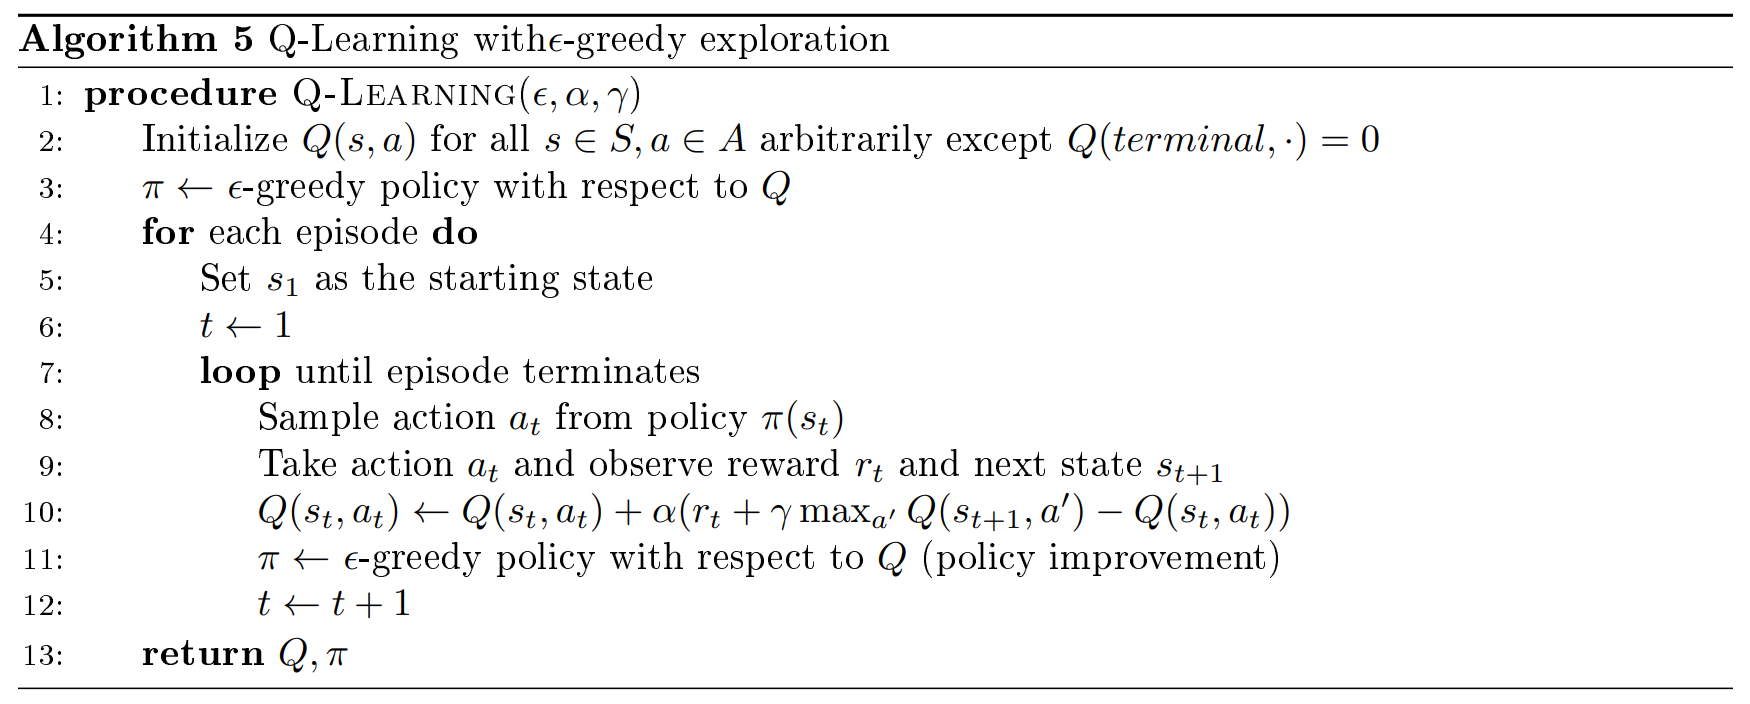 docs/stanford-cs234-notes-zh/img/fig4_alg_5.png